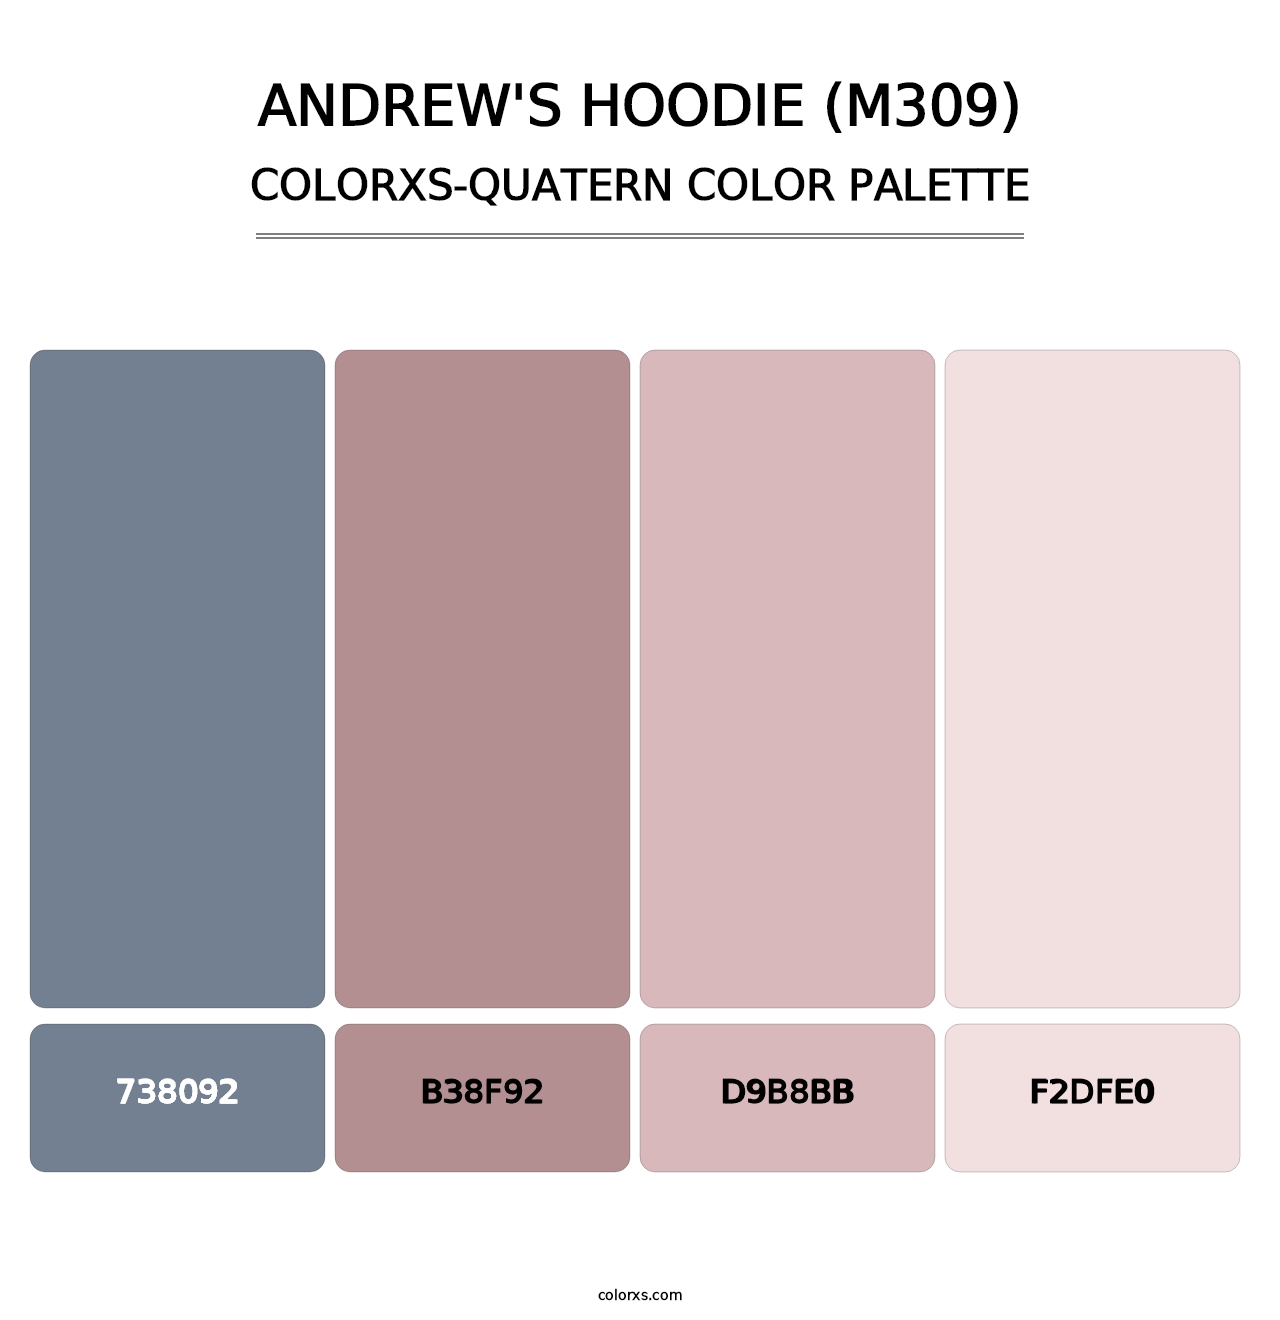 Andrew's Hoodie (M309) - Colorxs Quatern Palette